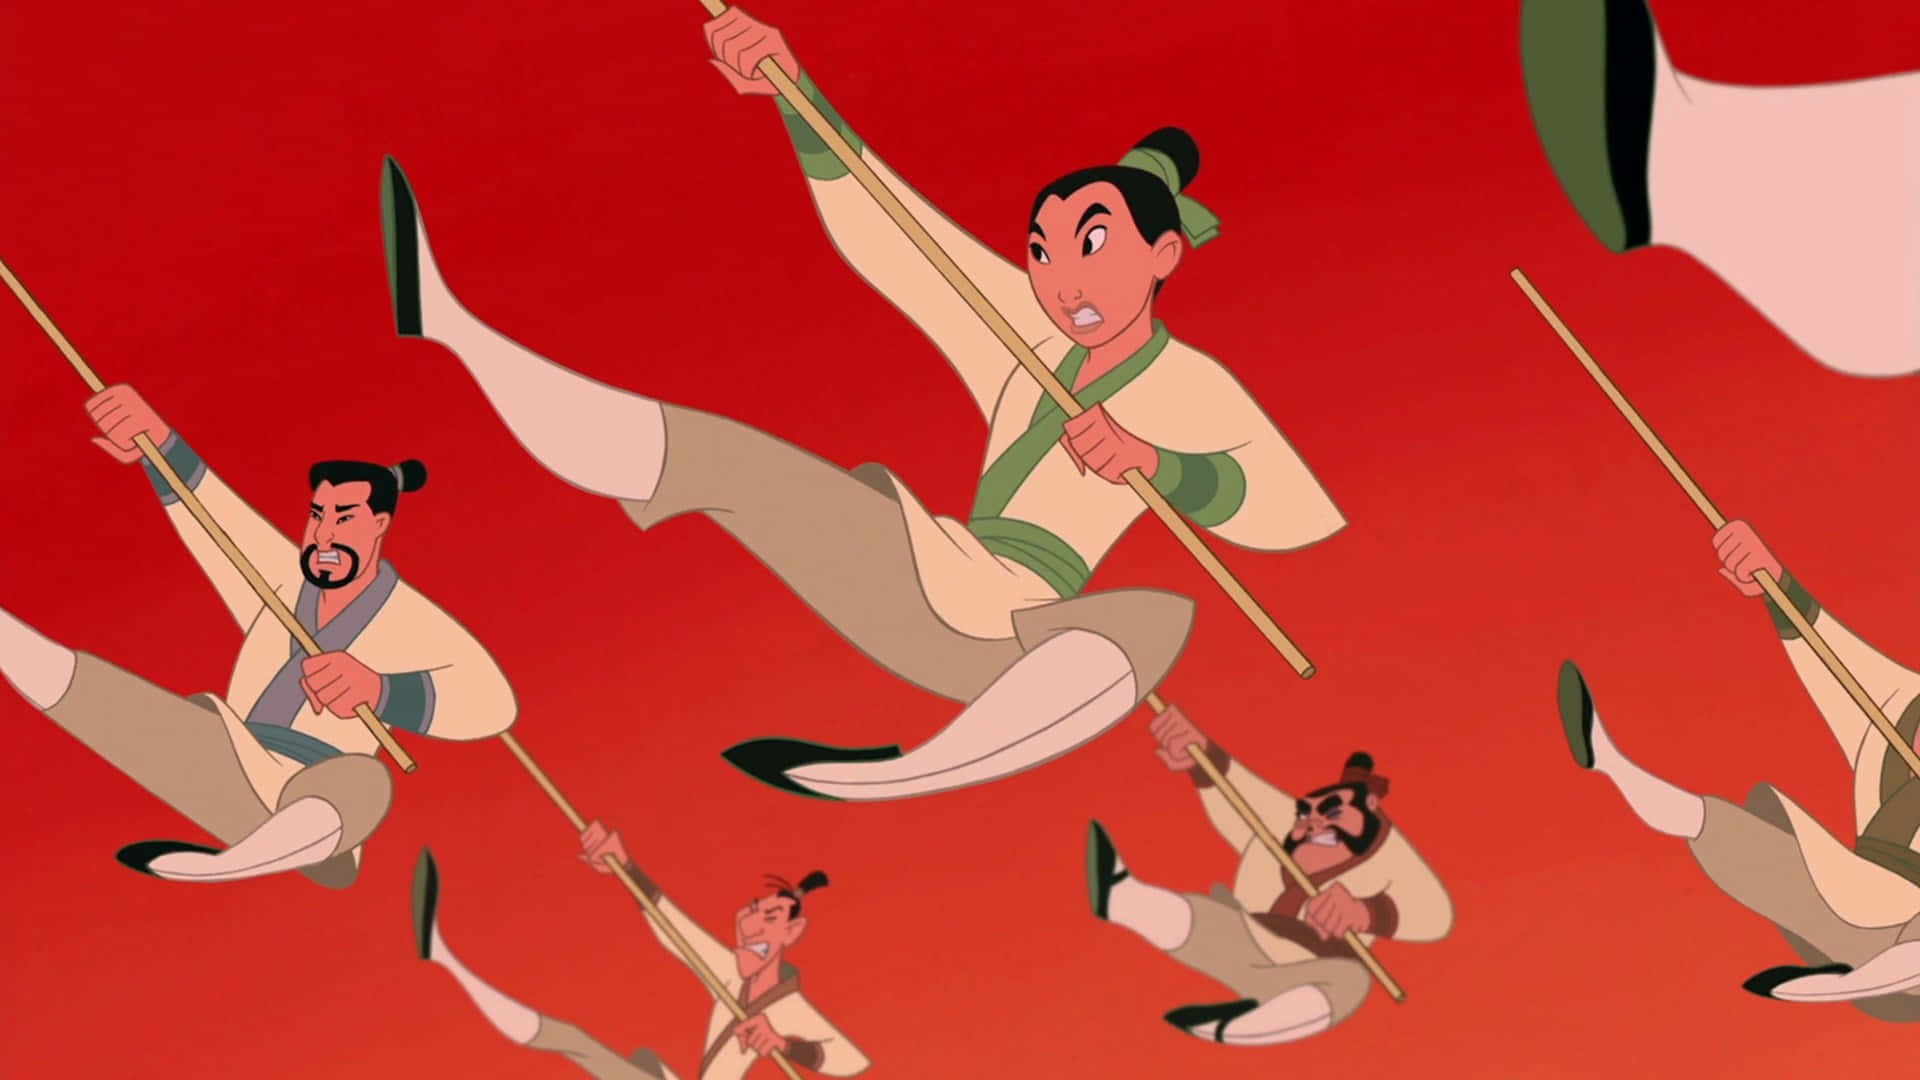 The brave Mulan leads her allies in the fight against injustice